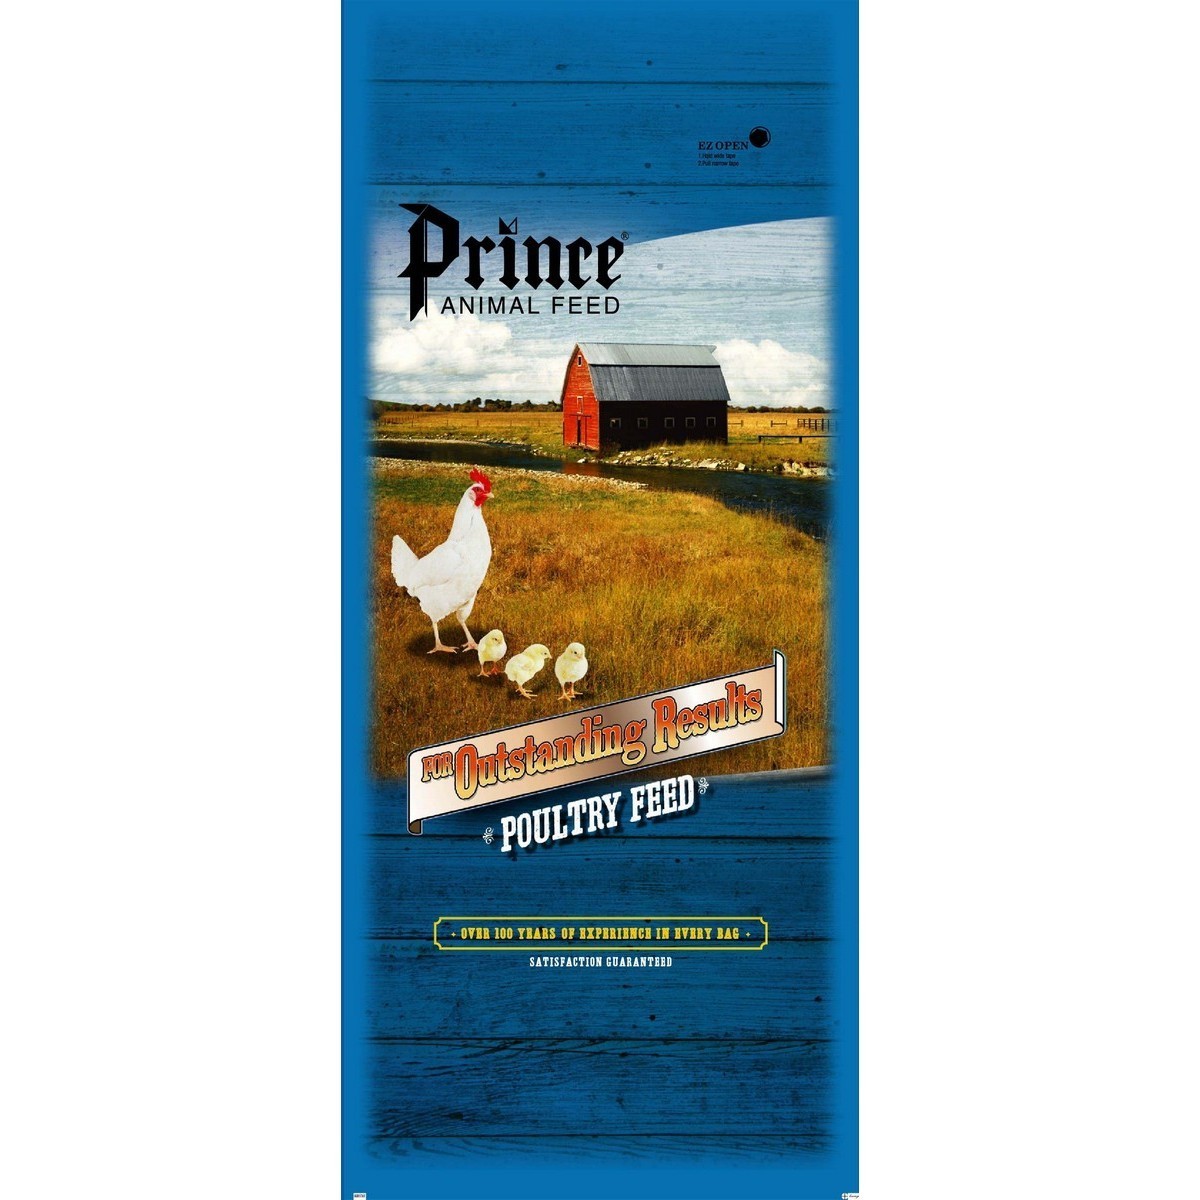 PRINCE PREMIUM FEED 001162 50 lbs Poultry Concentrate 36 Percent Meal